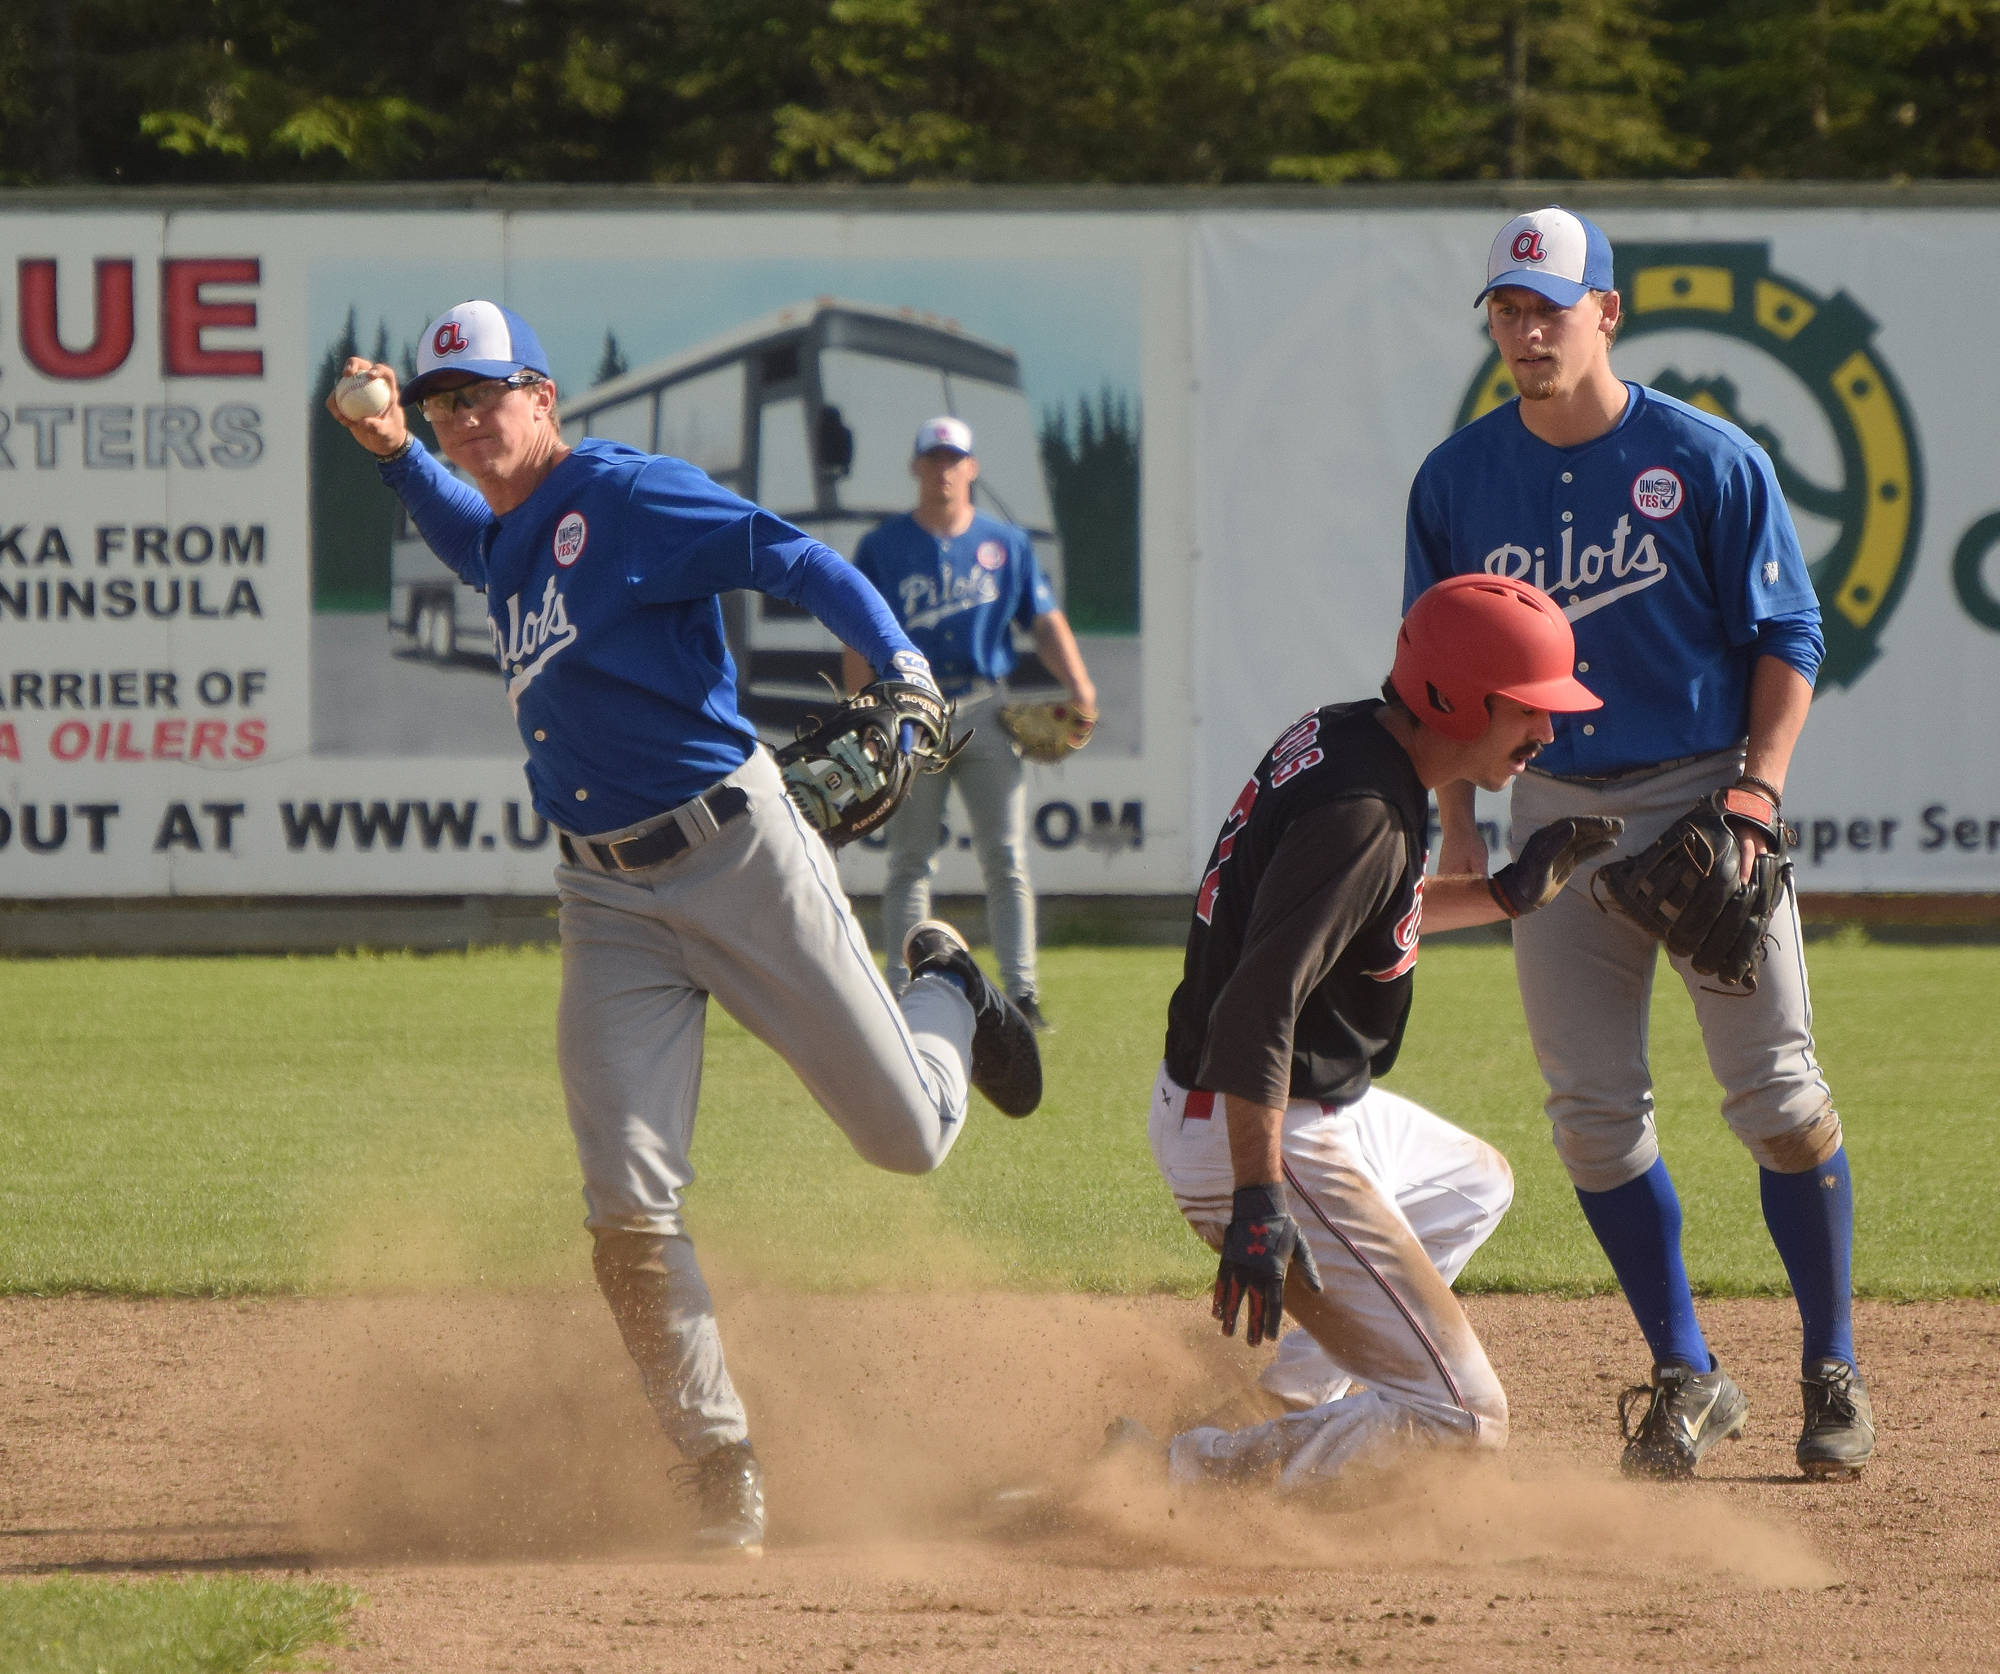 Peninsula Oilers baserunner Ryan Novis attempts to take second while Anchorage Glacier Pilots shortstop Marc Mumper (left) throws to first Friday at Coral Seymour Memorial Park in Kenai. (Photo by Joey Klecka/Peninsula Clarion)